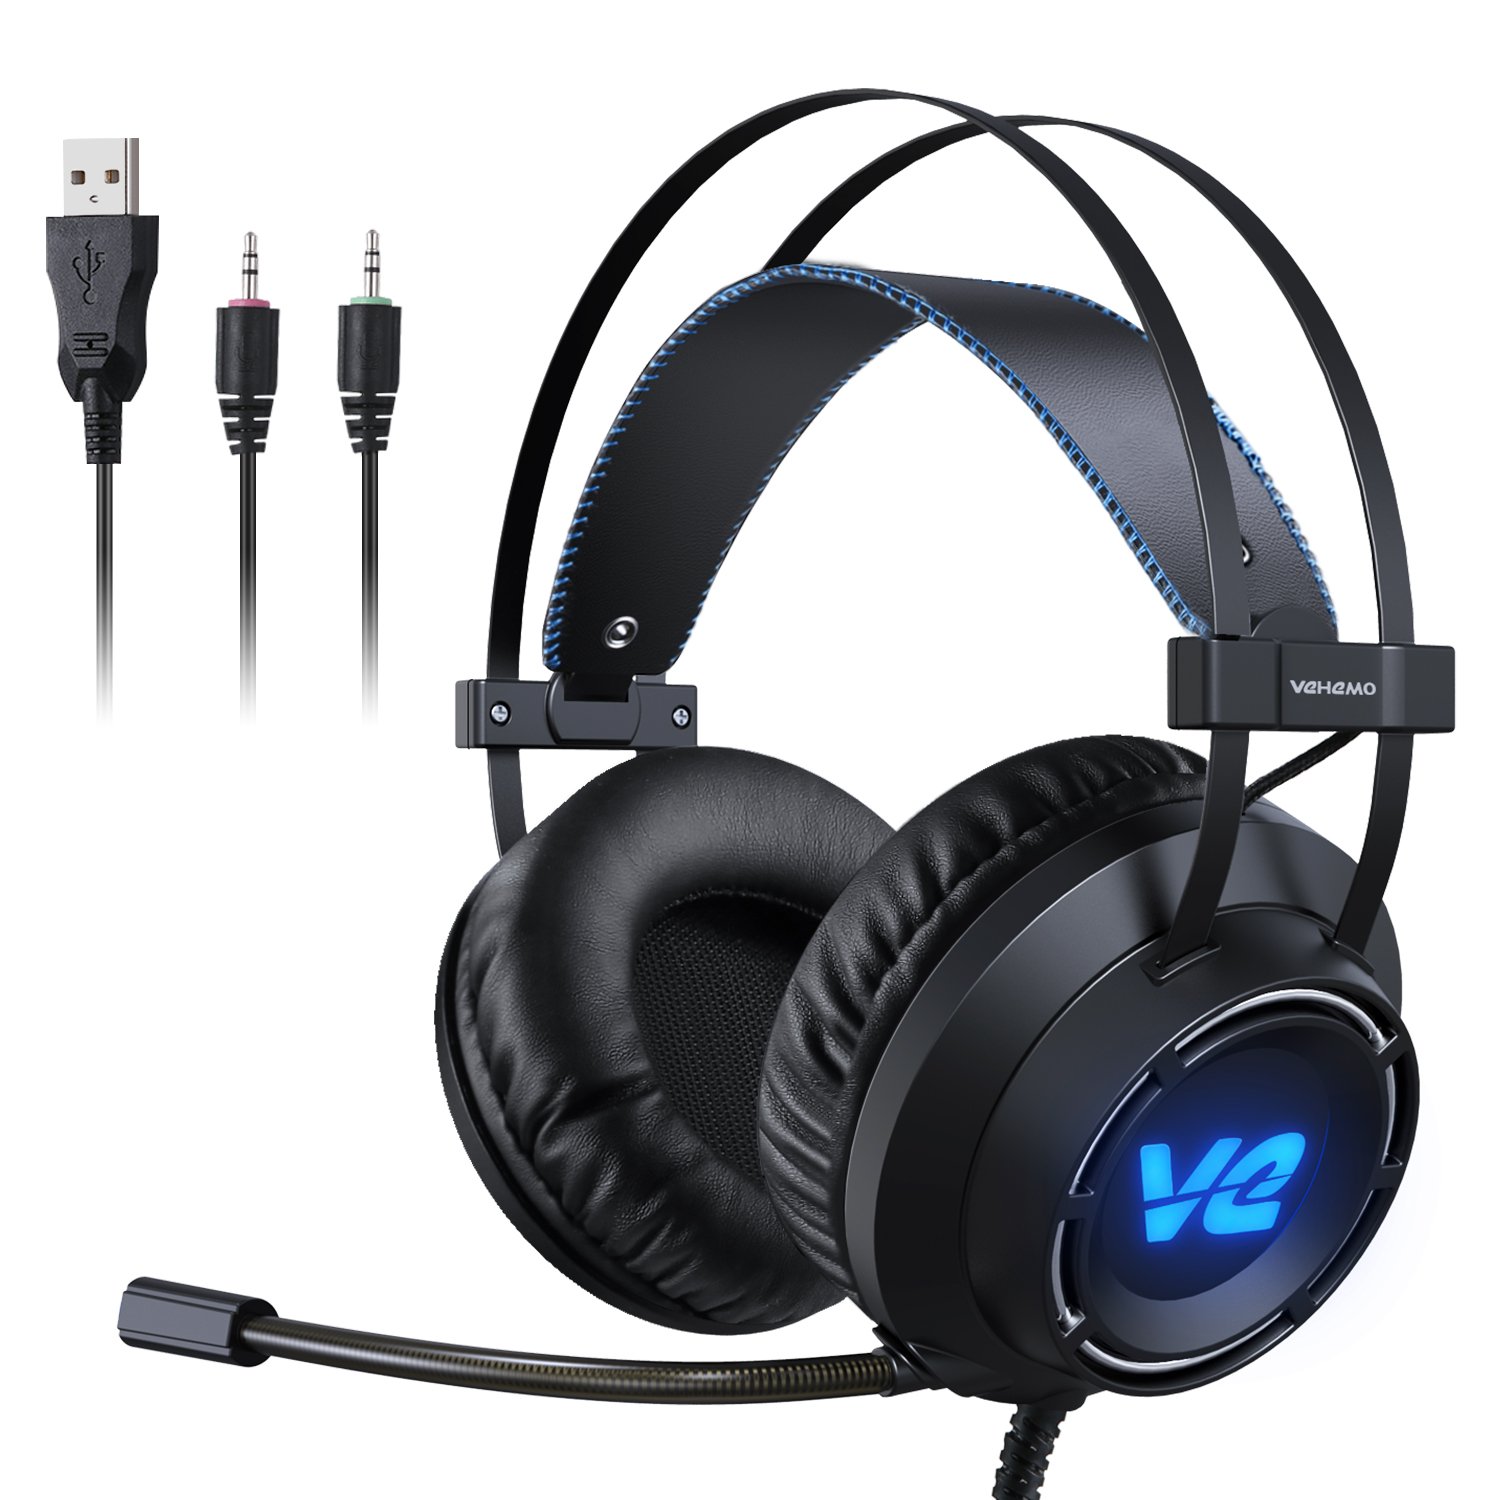 Auriculares gaming led solo 9,9€